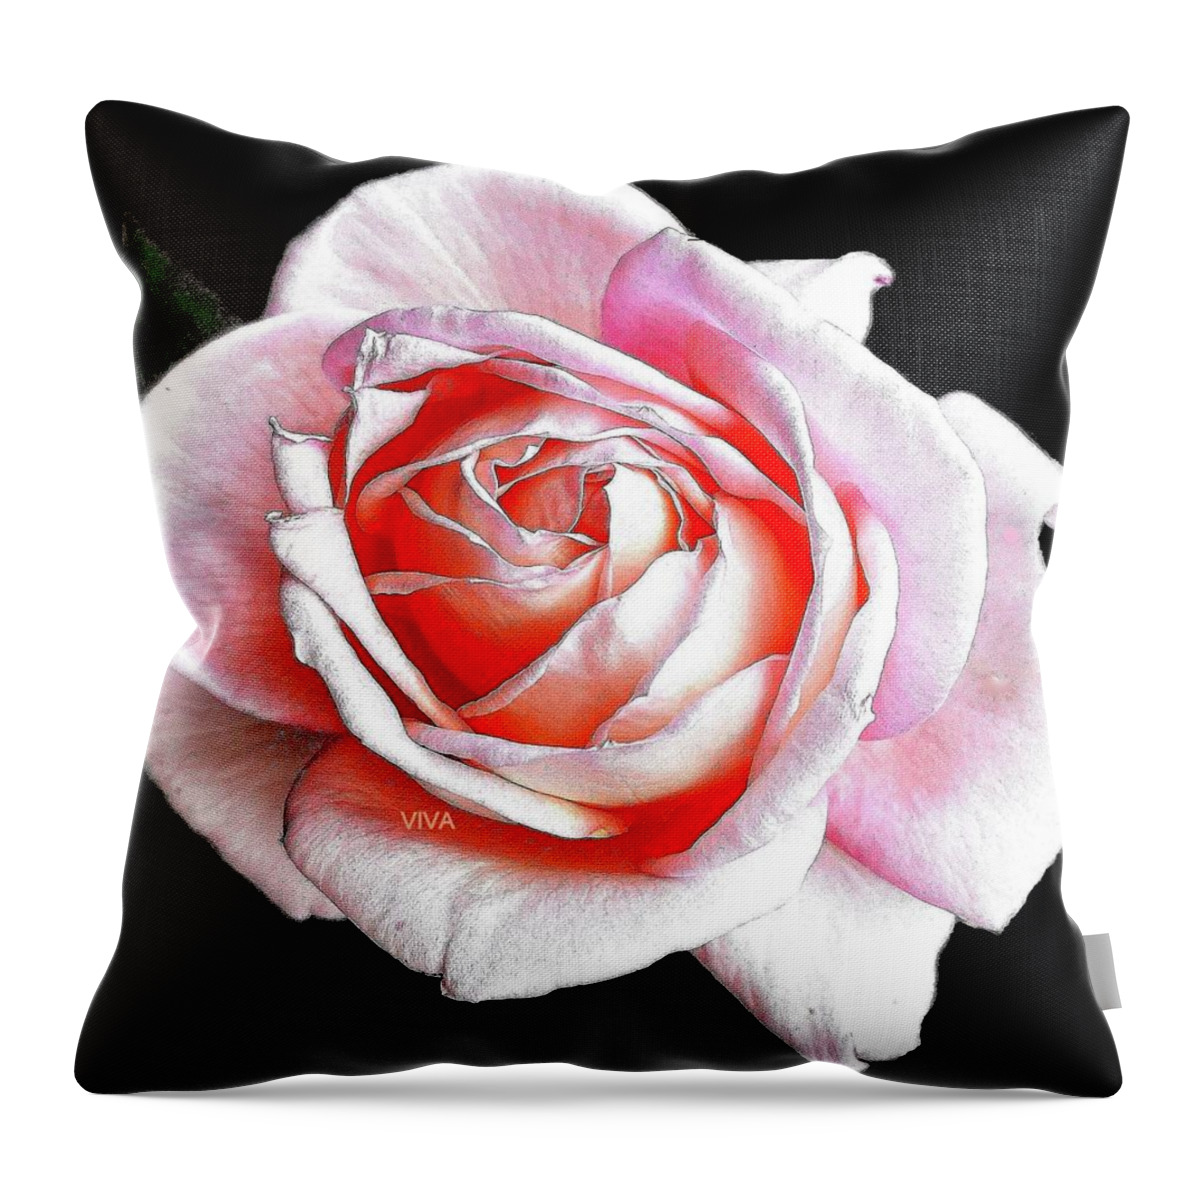 Rose Throw Pillow featuring the photograph My ROSIE by VIVA Anderson